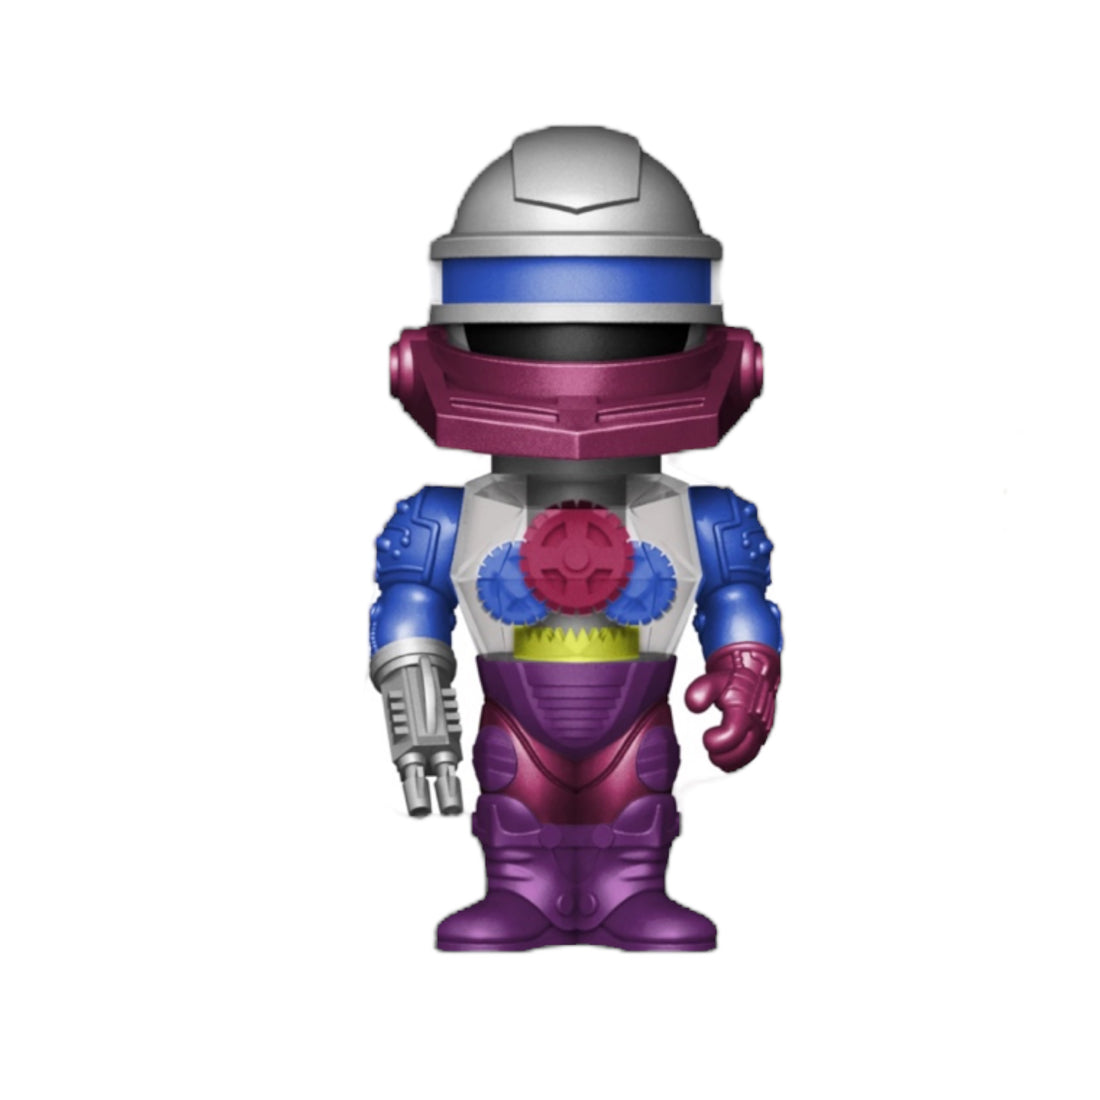 Funko Soda - Roboto (Chance of Chase) - 2021 Fall Convention Exclusive (INTL)